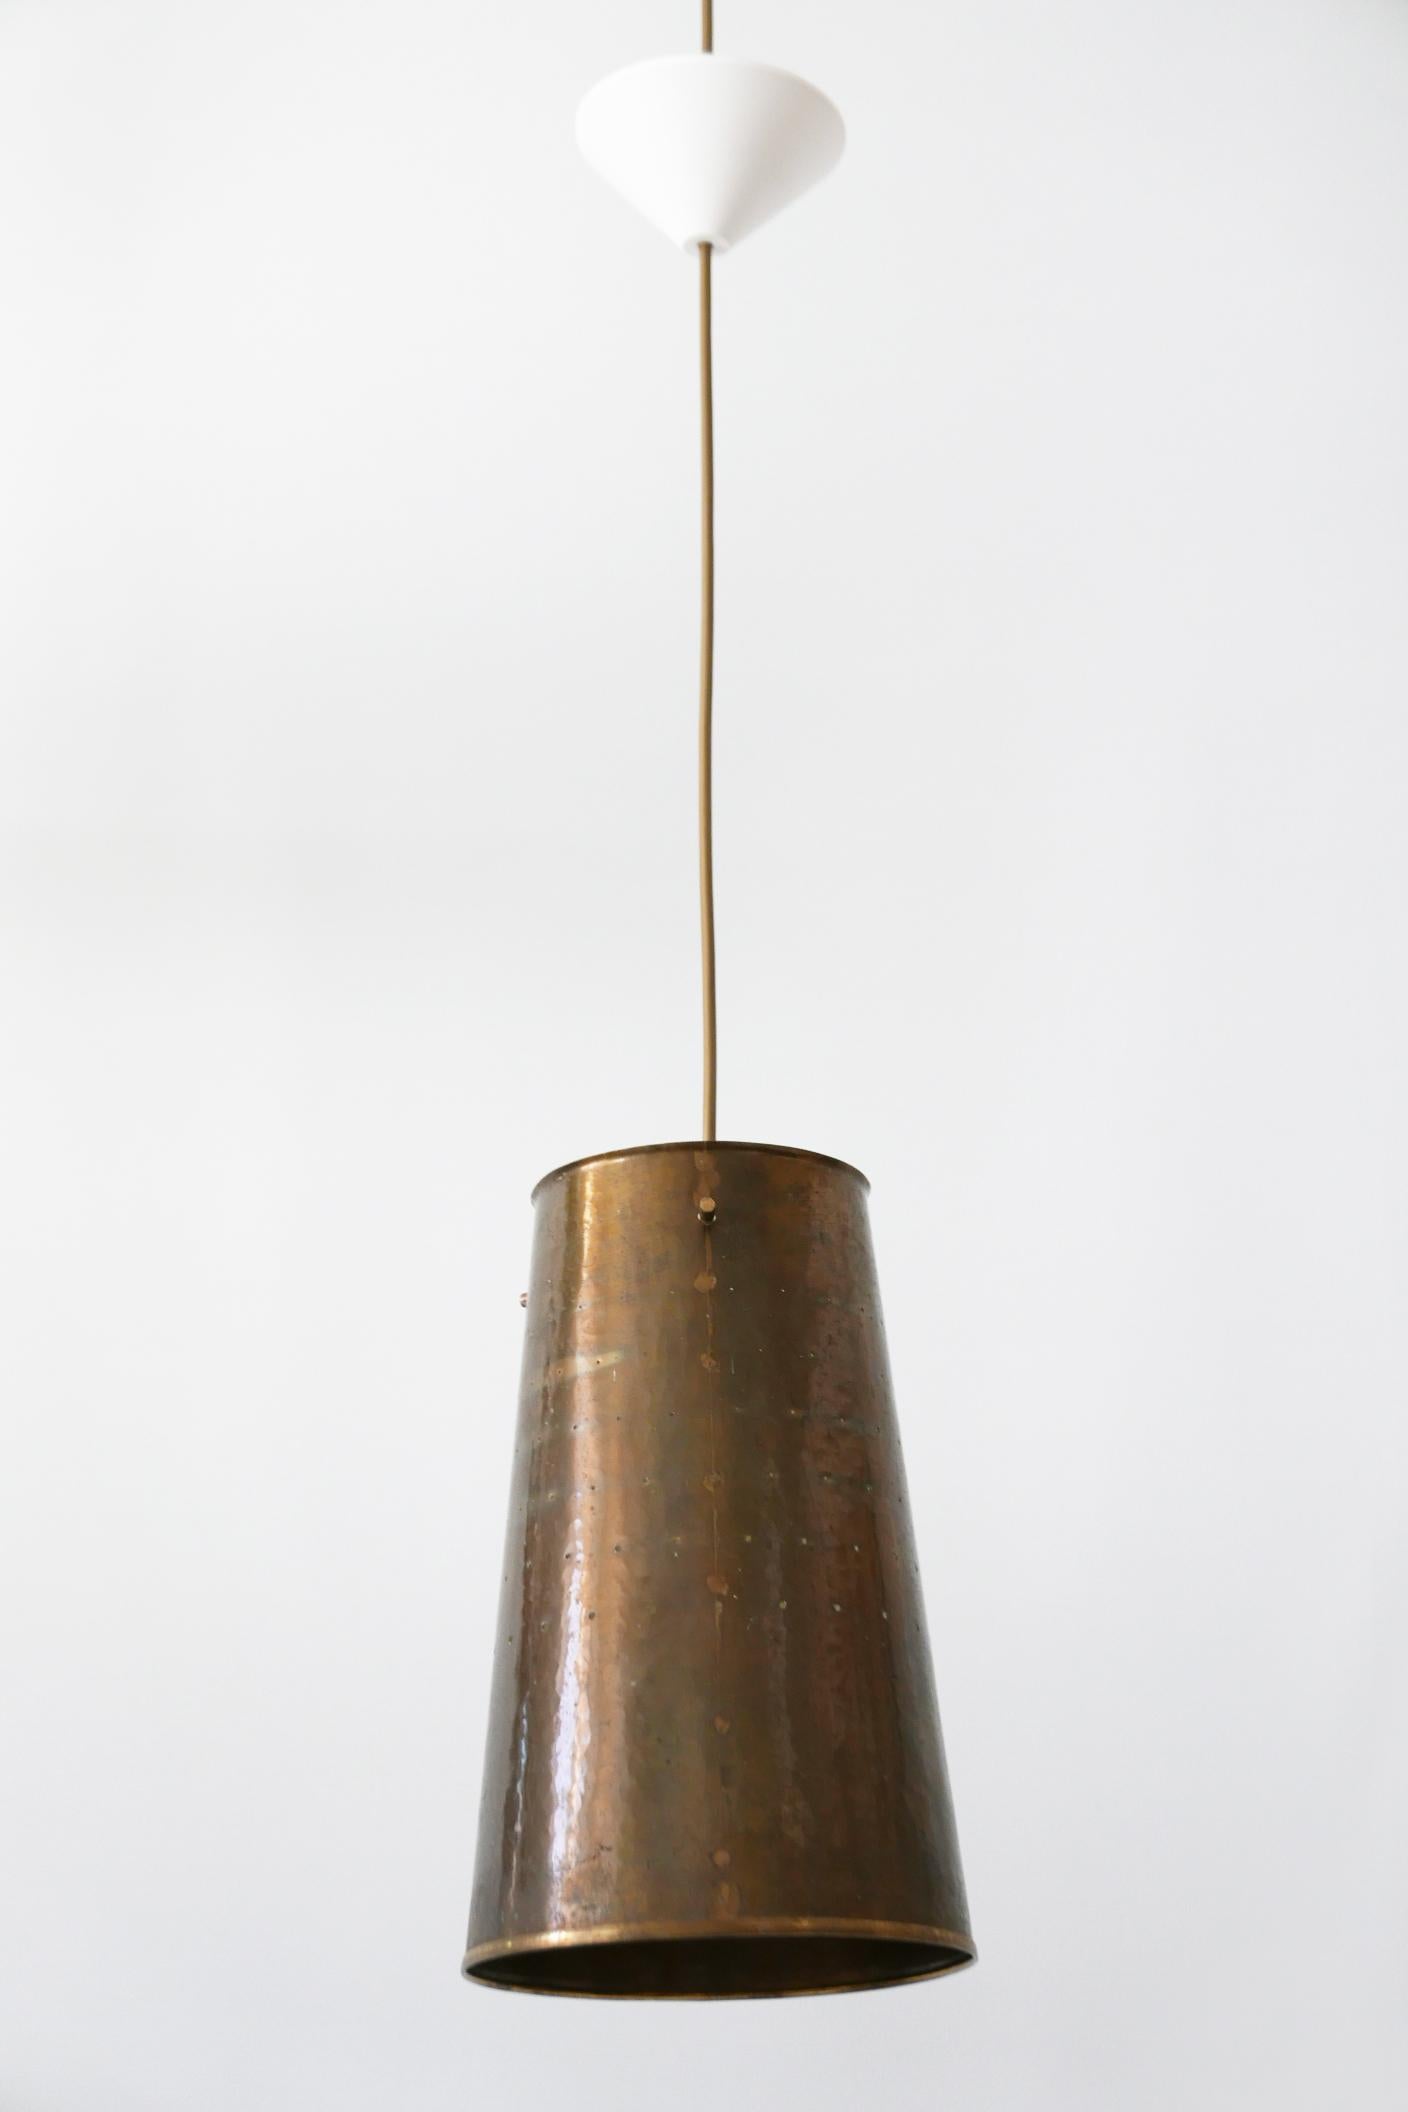 Elegant Mid-Century Modern brass pendant lamp or hanging light. Designed and manufactured in Germany, 1950s.

Executed in copper anodized and perforated solid brass, it comes with 1 x E27 Edison screw fit bulb holder, is rewired and in working